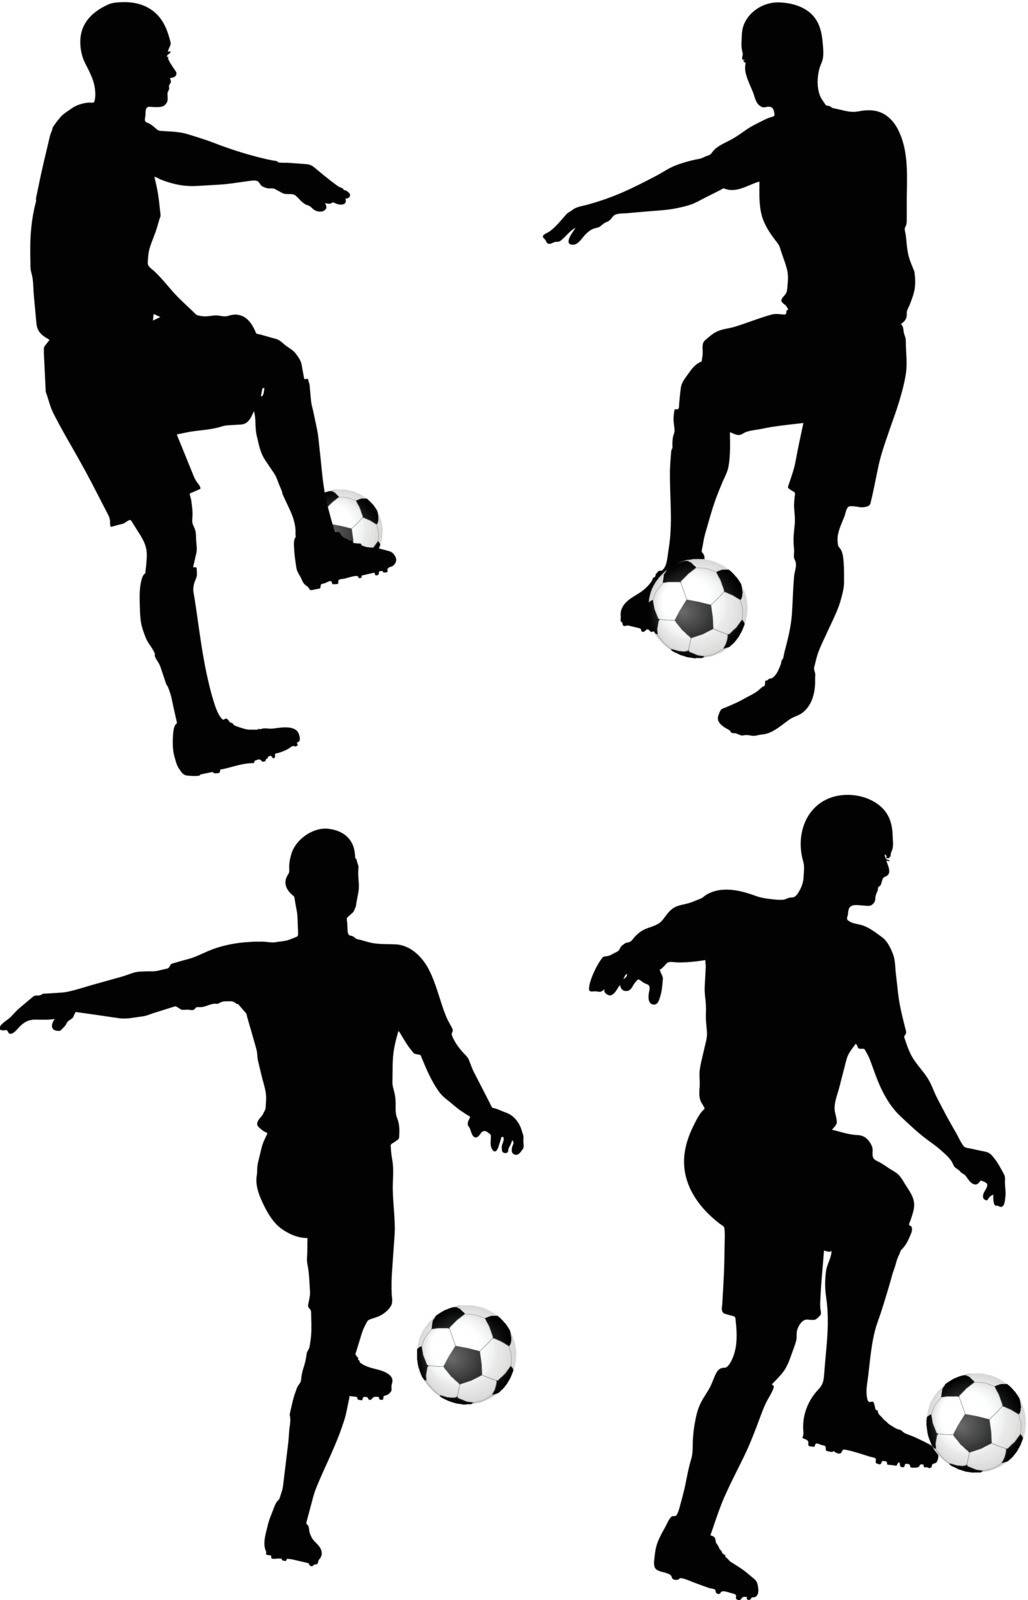 isolated poses of soccer players silhouettes in dribble position